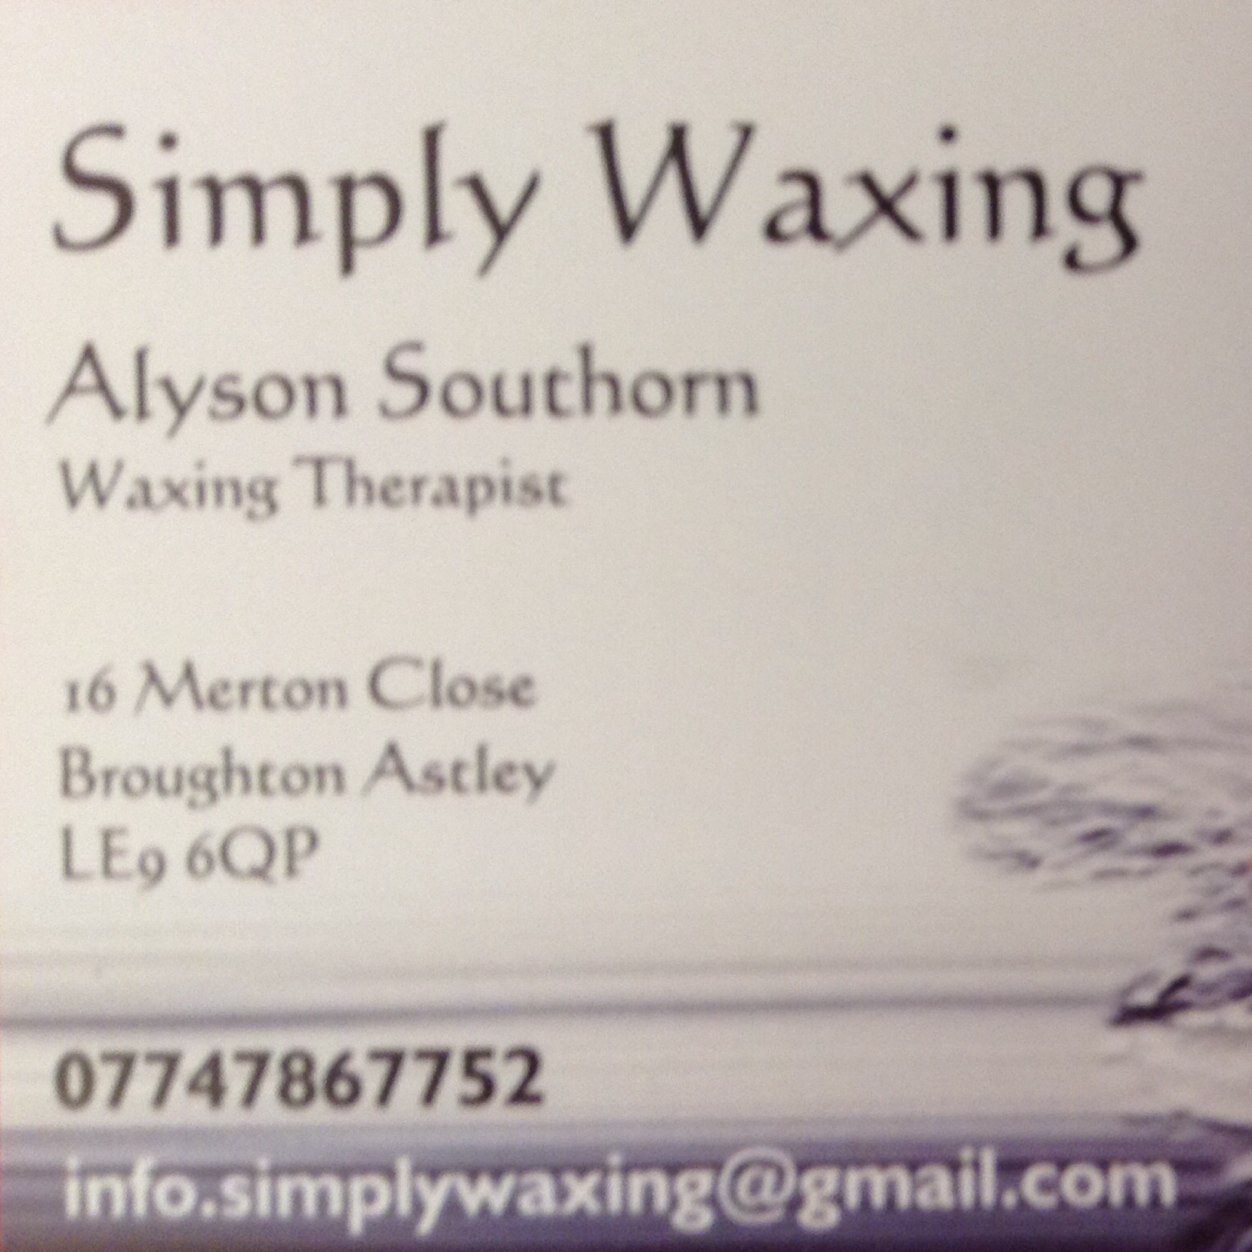 Ladies and Men's waxing for all areas of the body.